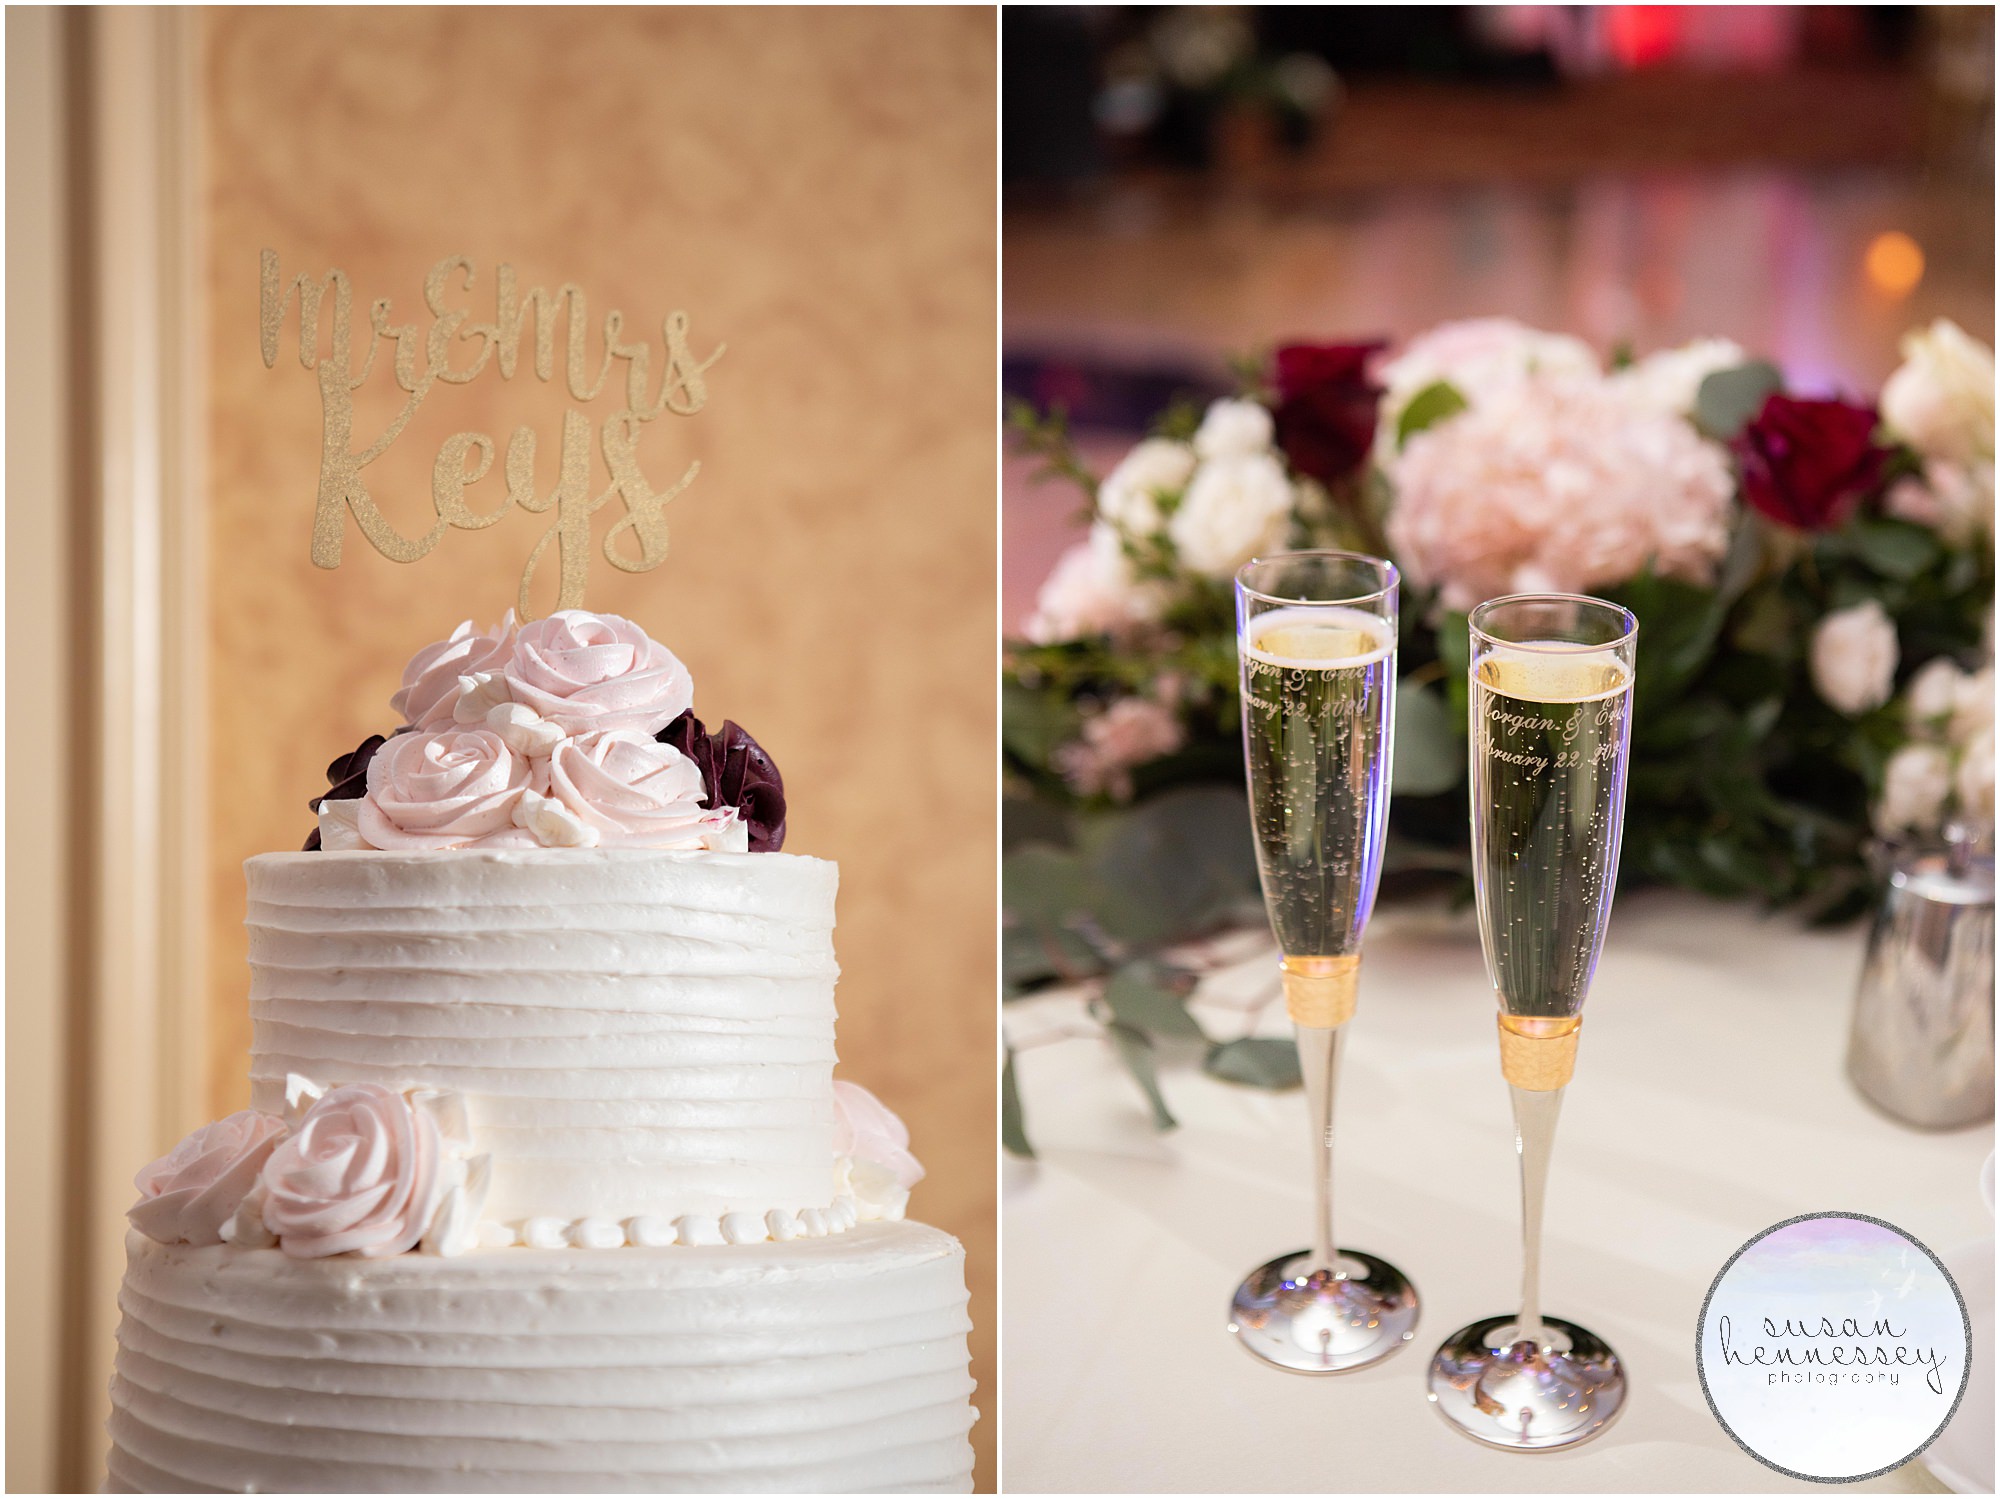 Cake topper and champagne glass details at the Merion wedding reception